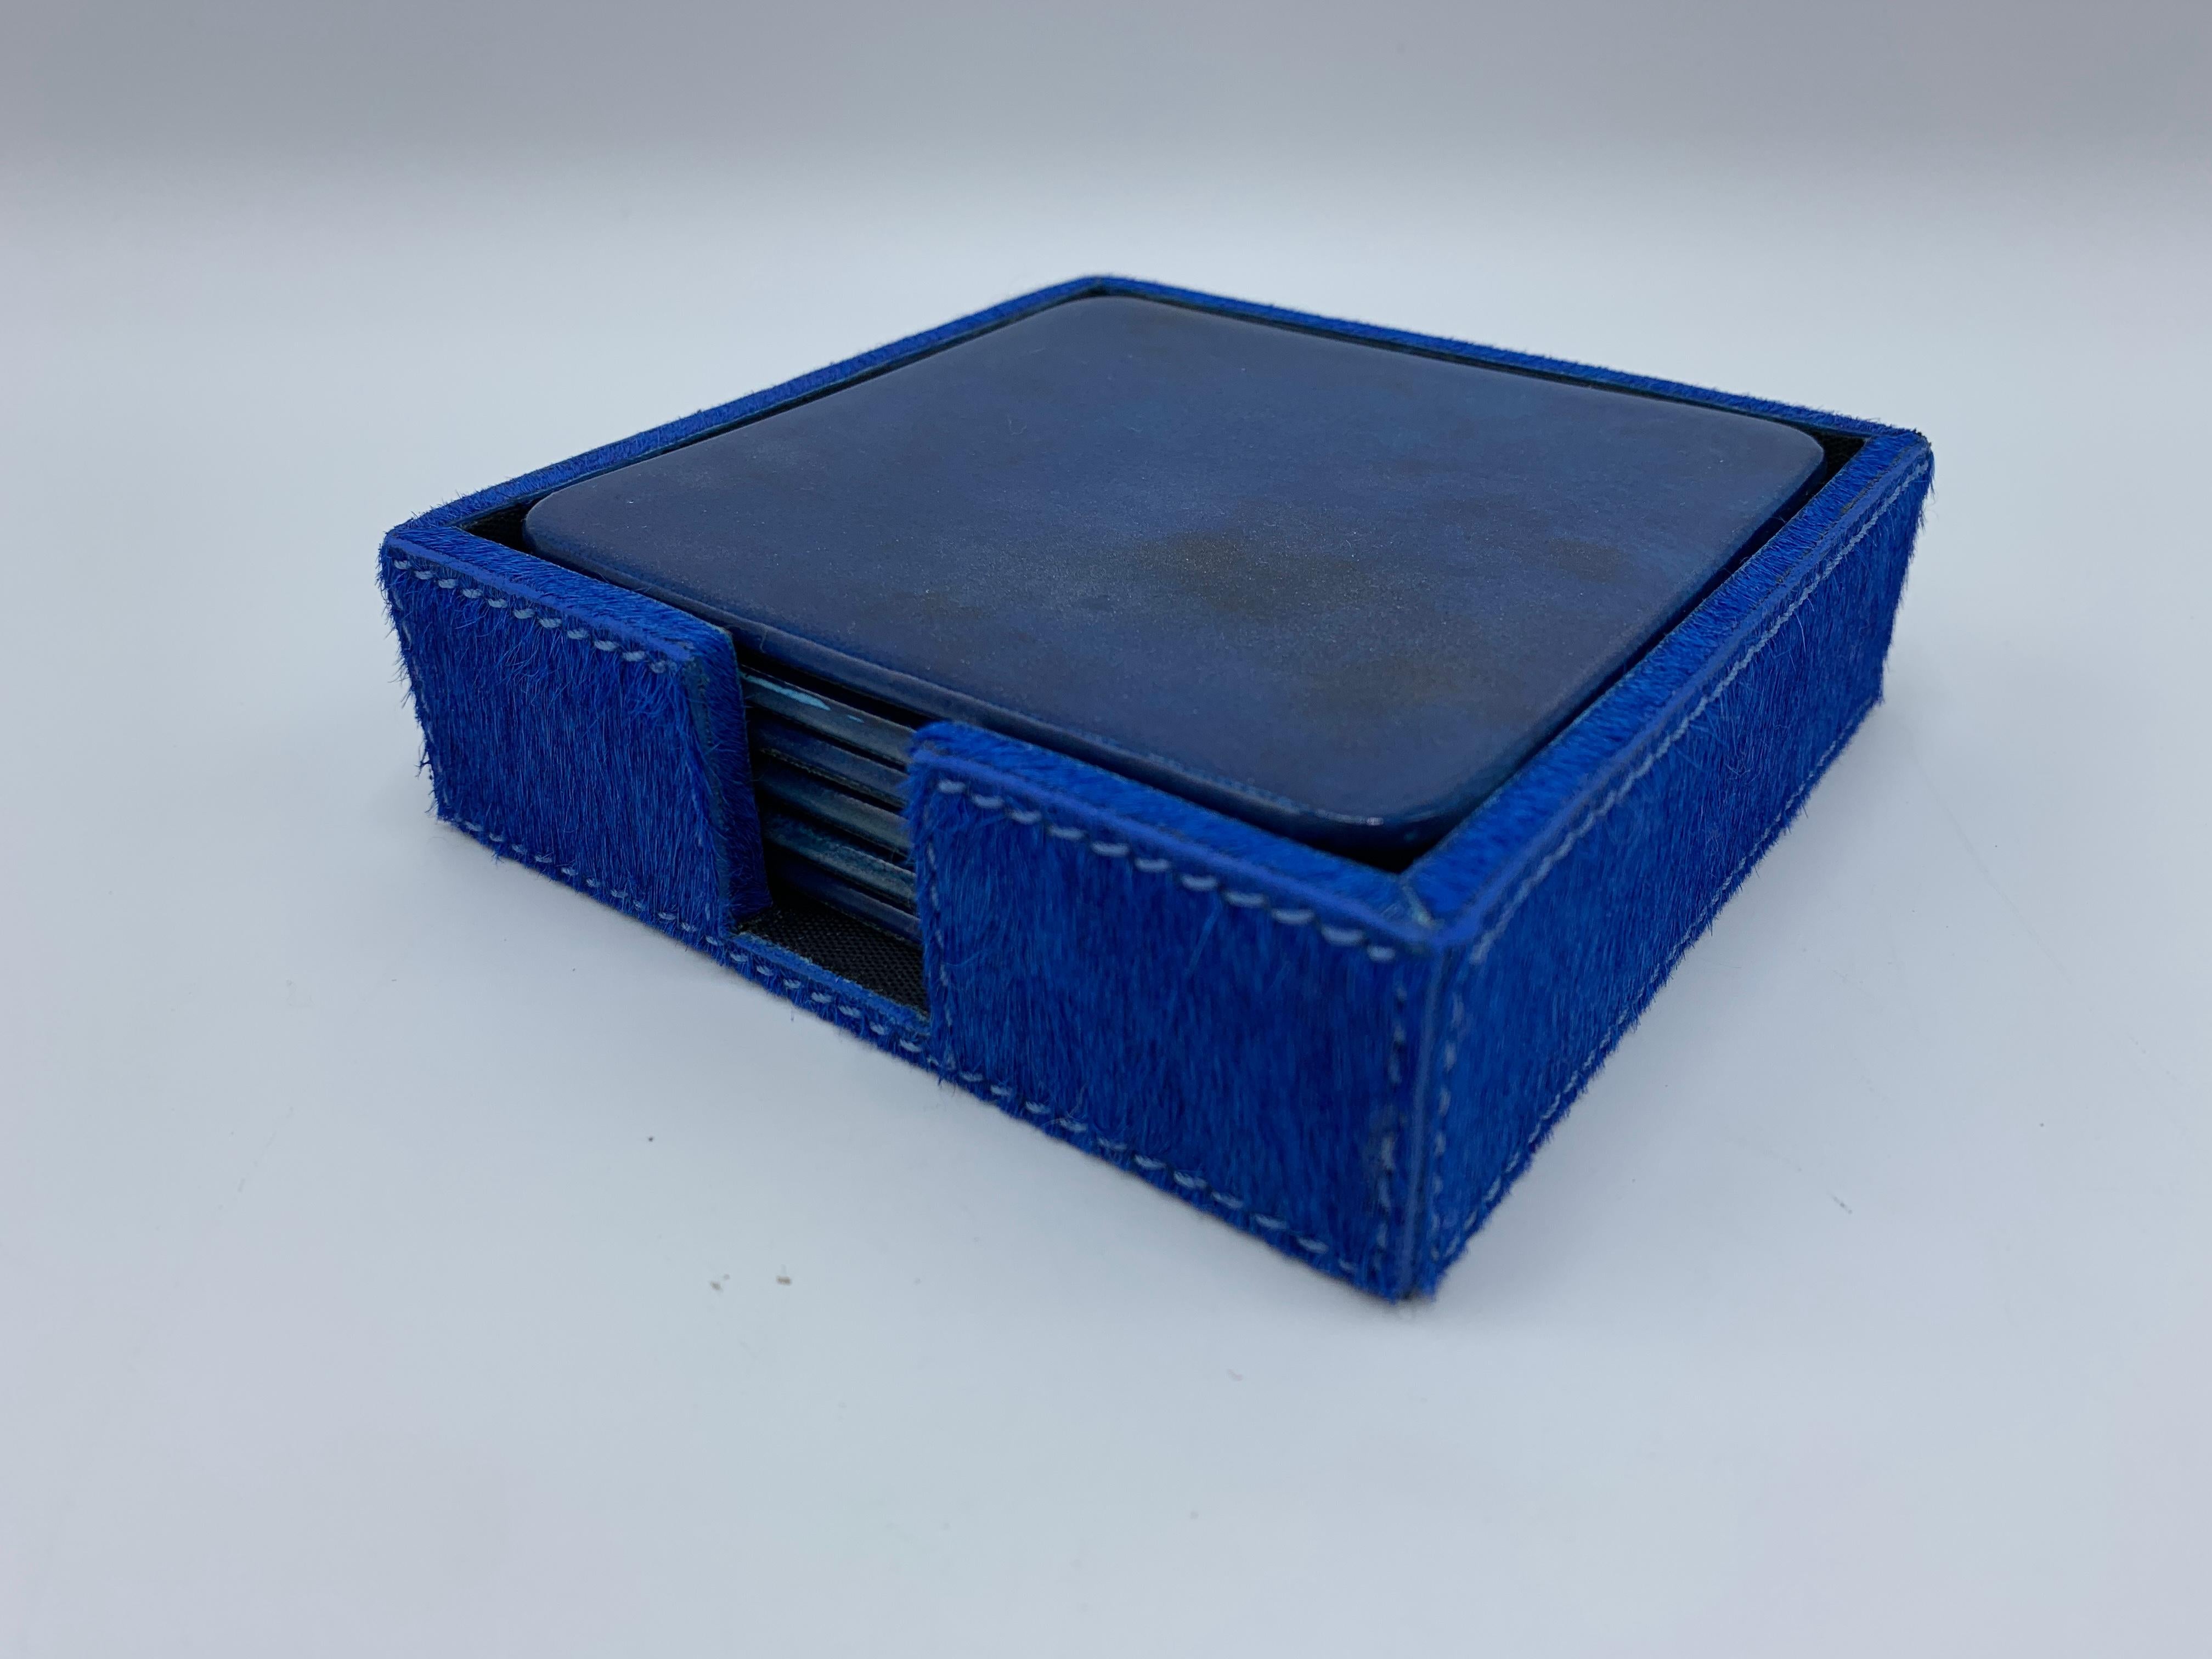 Listed is a gorgeous, set of six, Aldo Tura style blue lacquered goatskin parchment coasters. The set has a complimentary blue dyed hide coaster tray. Seven pieces total. Backing is a black, water-resistant nylon material. Each coaster measures 4in